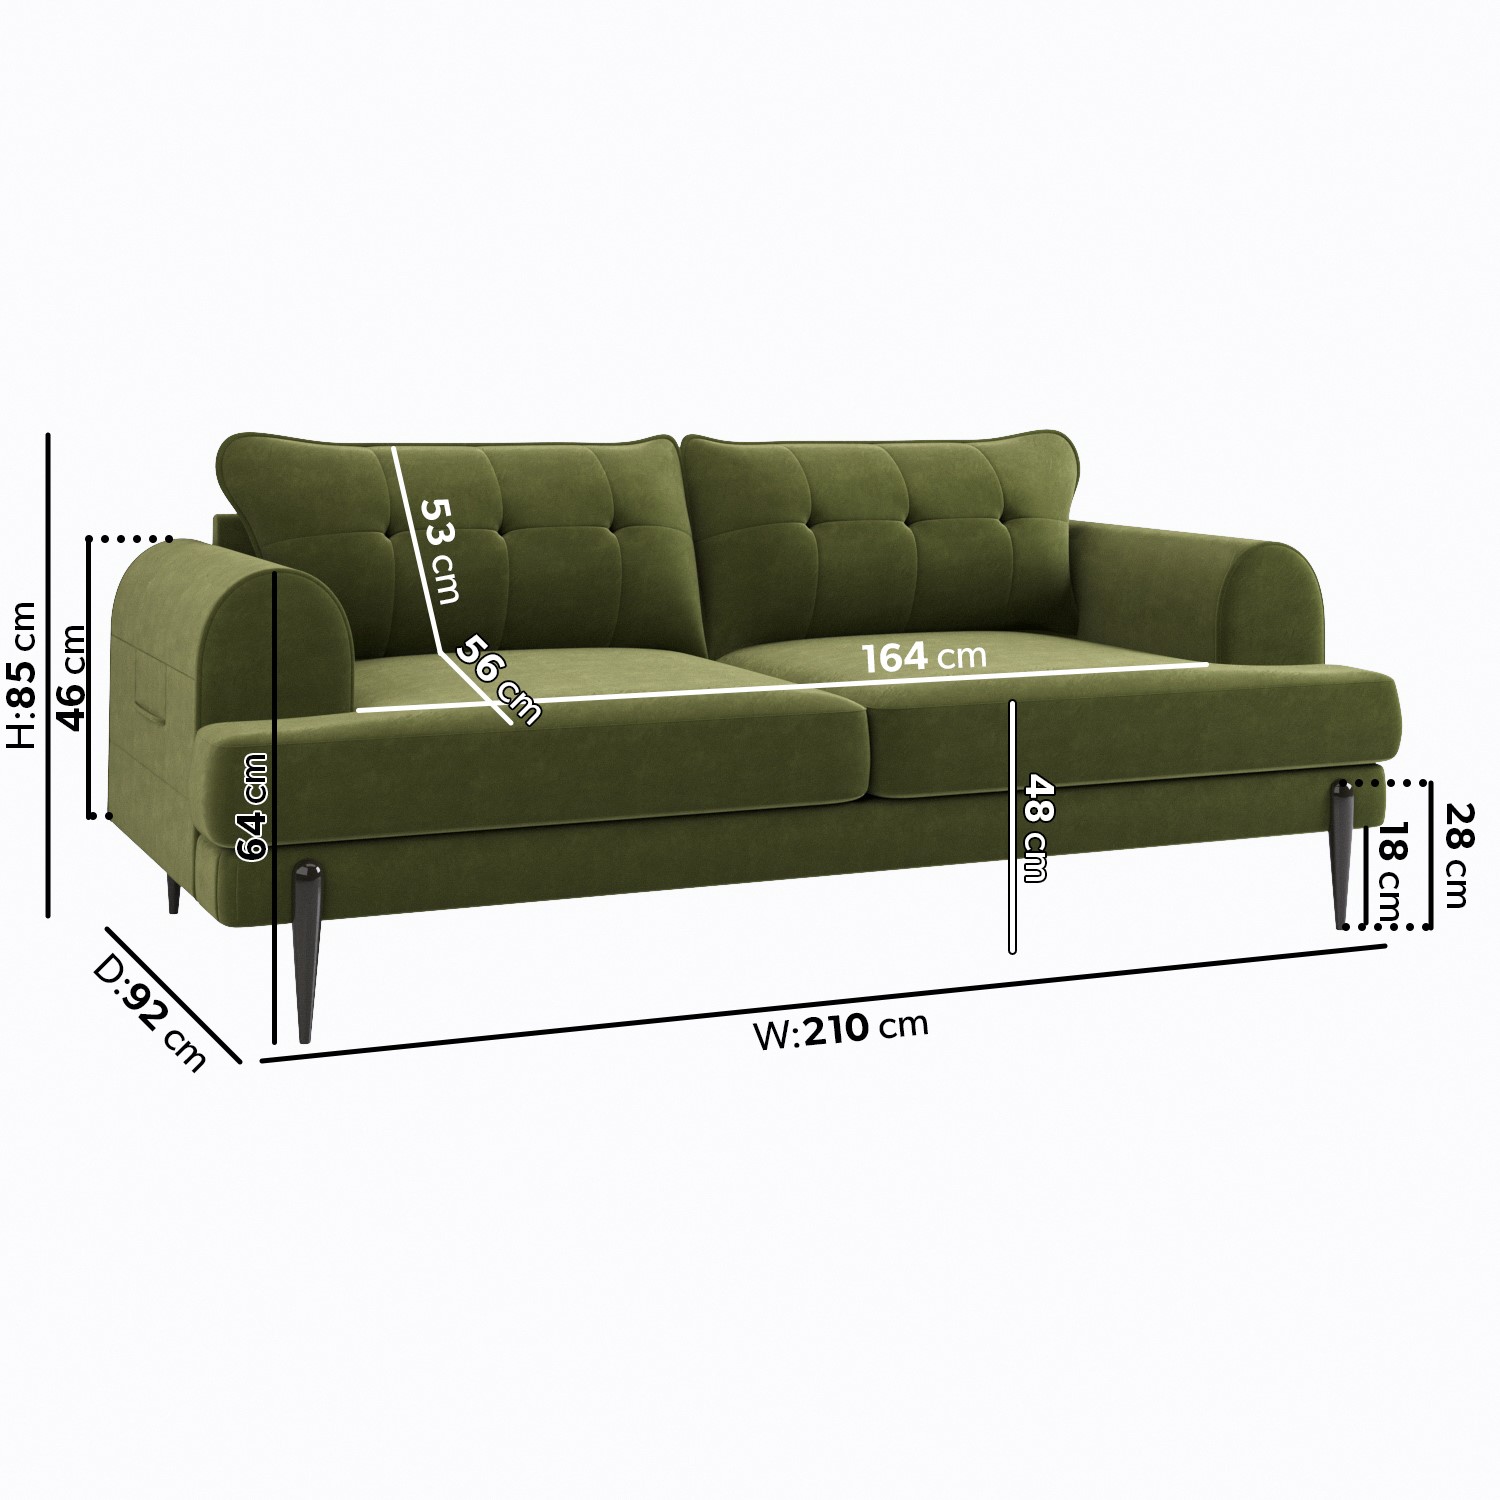 Read more about Olive green velvet 3 seater sofa rosie